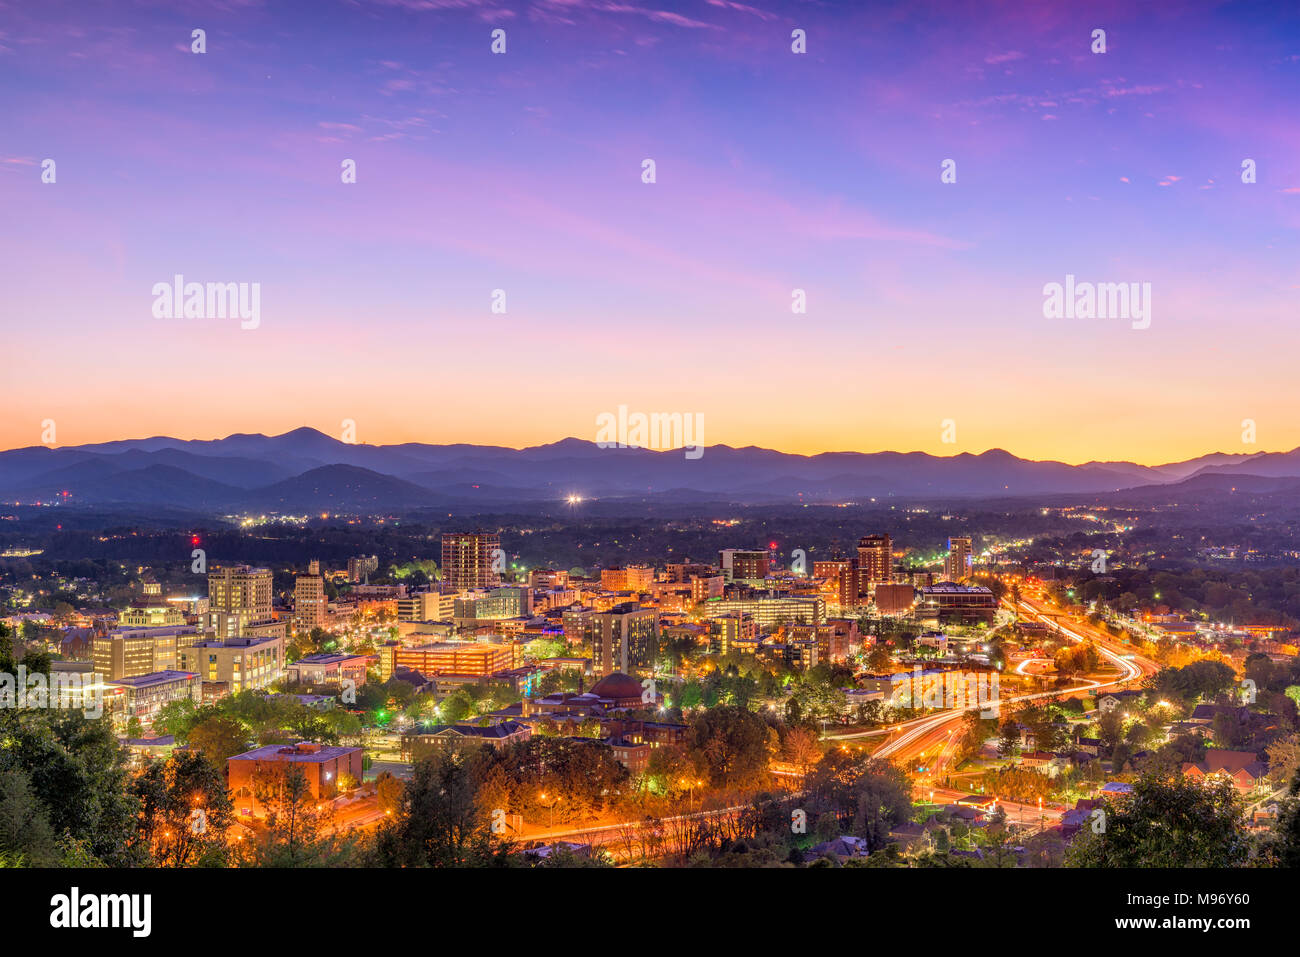 Asheville, North Carolina, USA skyline over downtown with the Blue Ridge Mountains. Stock Photo